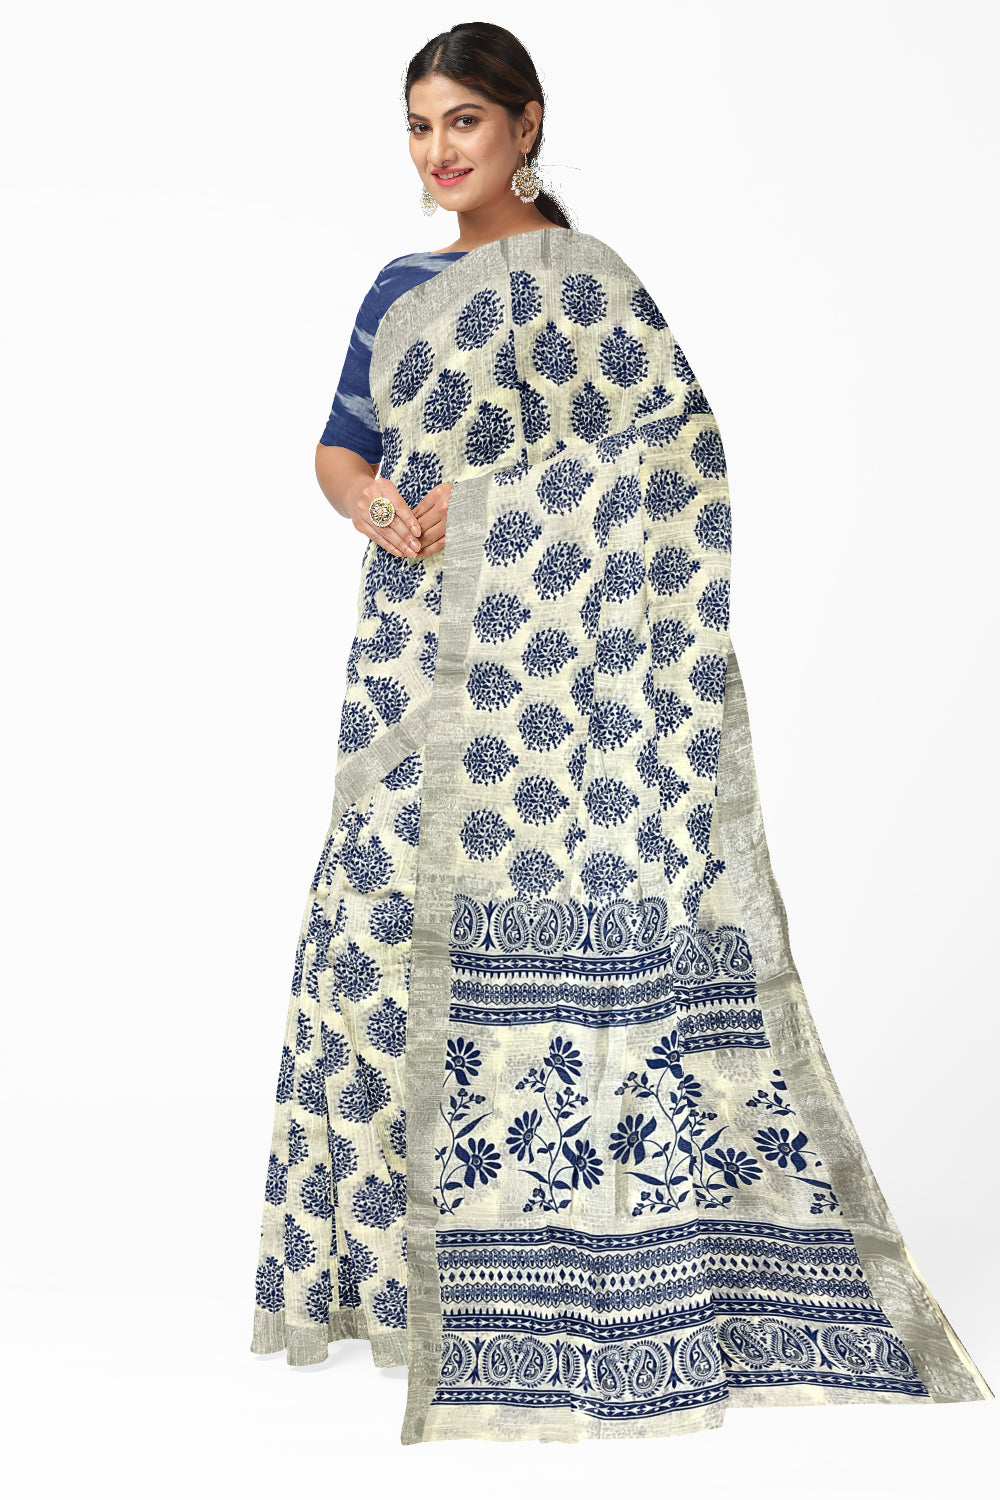 Southloom Linen White Saree with Blue Floral Prints and Tassels works on Pallu